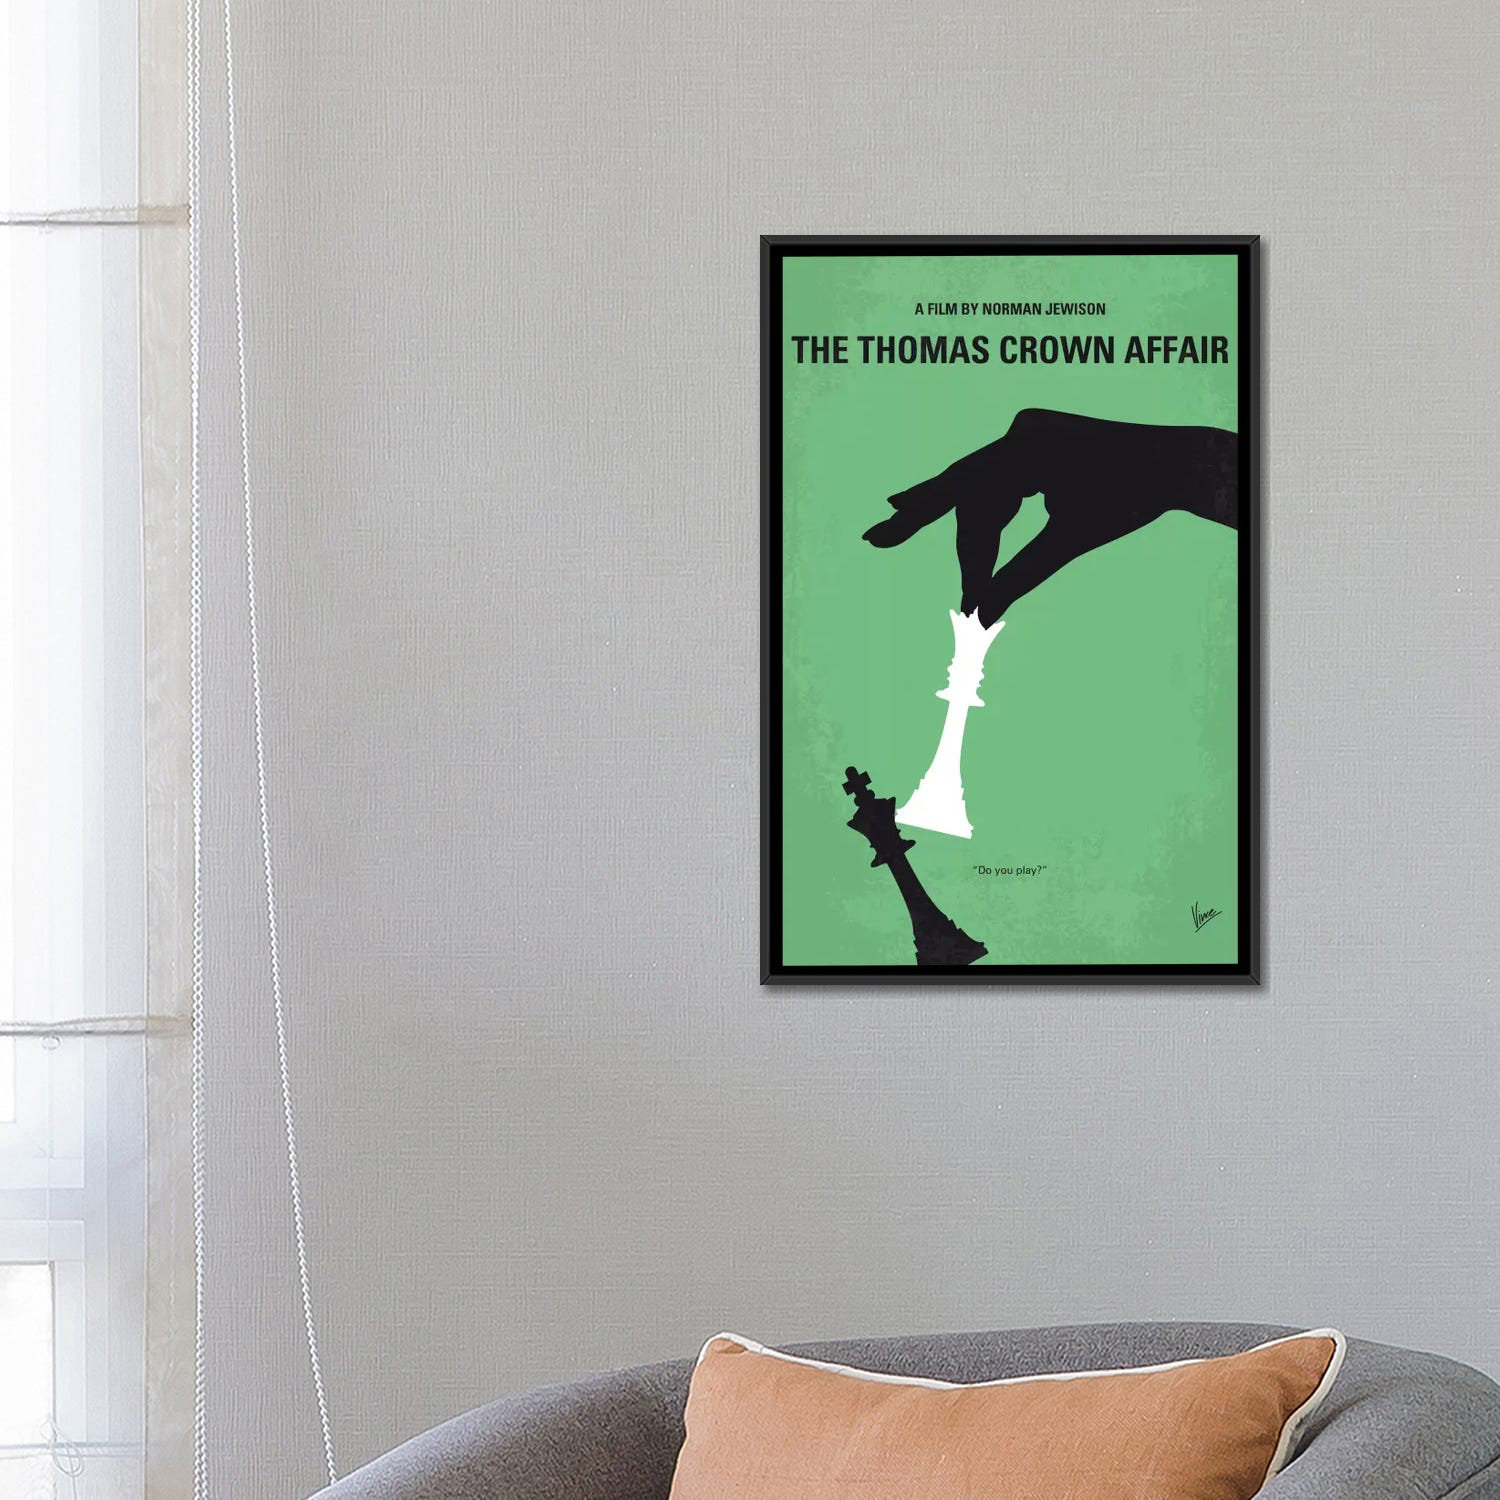 10 Things I Hate About You Movie Poster Art Room Decor Canvas Poster Gift 